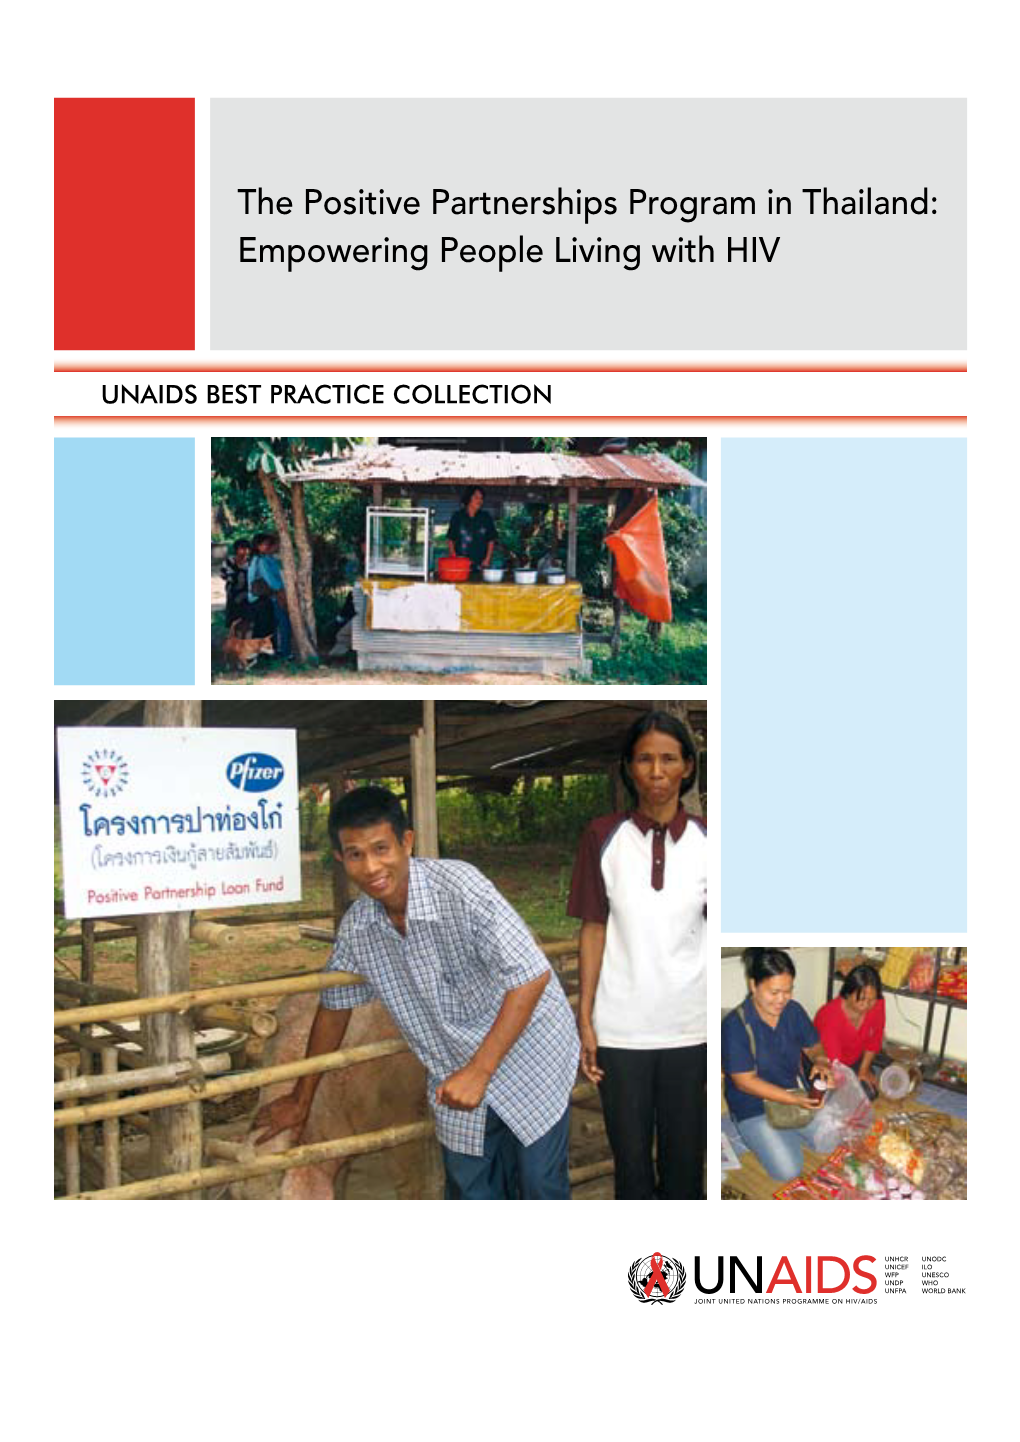 The Positive Partnerships Program in Thailand: Empowering People Living with HIV